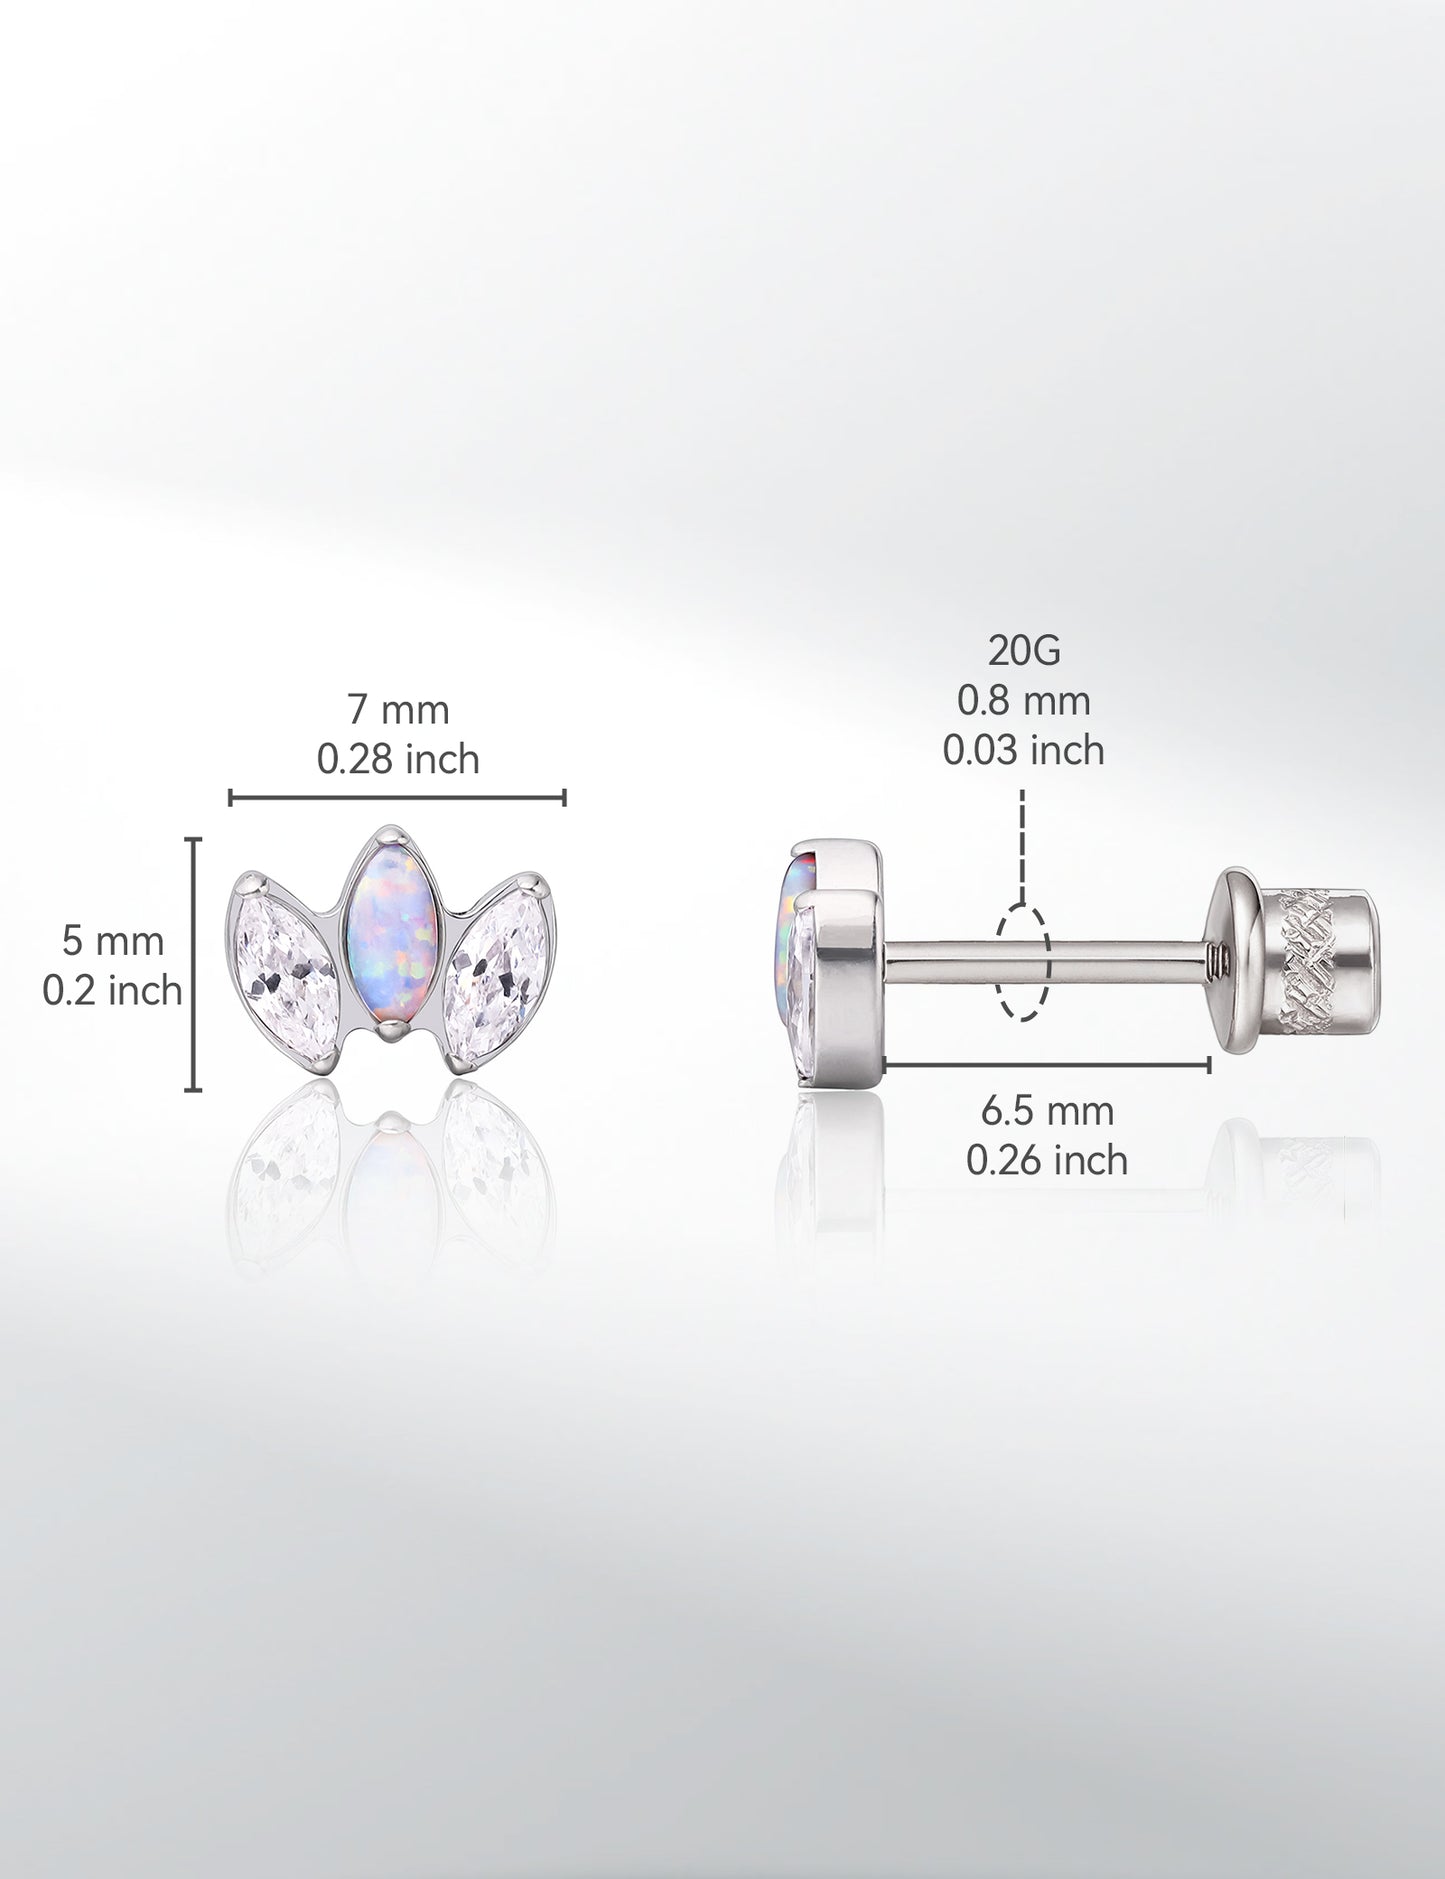 limerencia Hypoallergenic G23 Implant Grade Titanium Screw Back Earrings Tragus 20G Helix F136 Piercing Post for Girls' Sensitive Ears Cartilage- CZ + Opal Crown